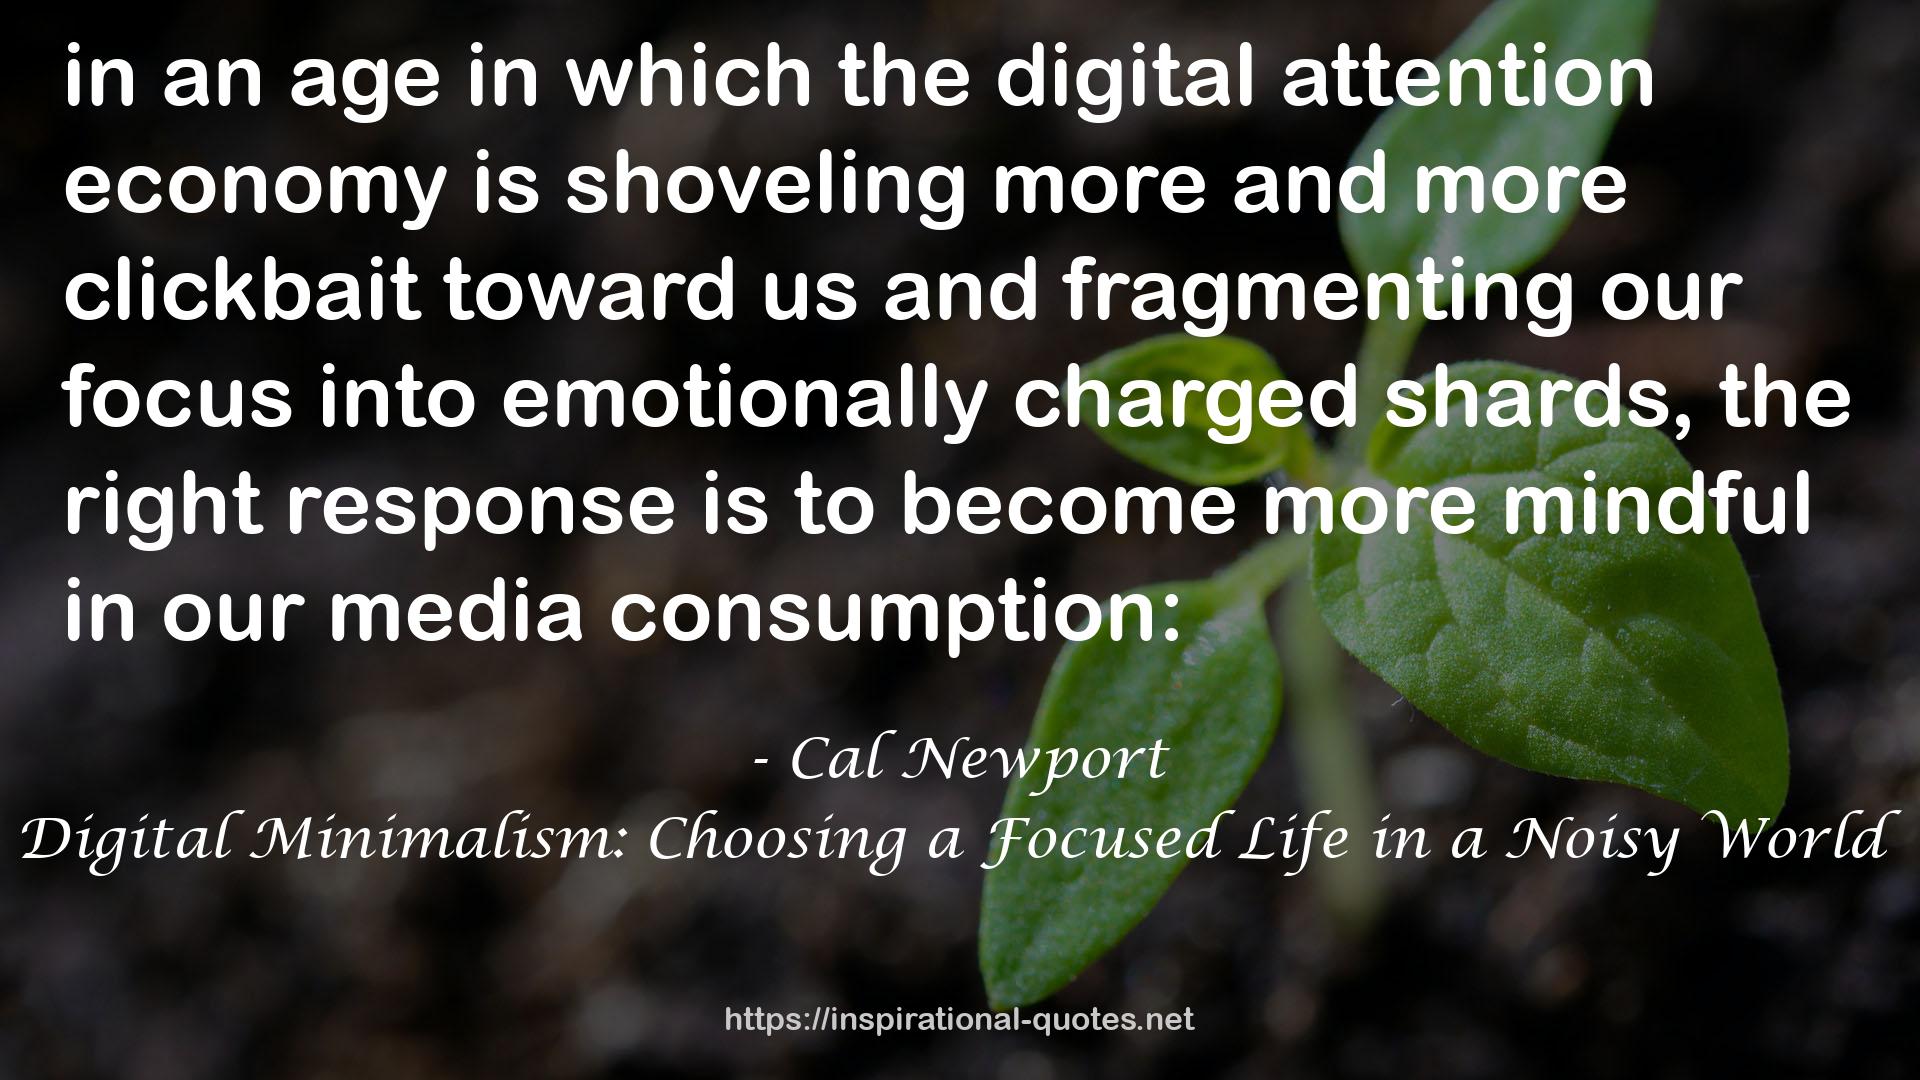 Digital Minimalism: Choosing a Focused Life in a Noisy World QUOTES